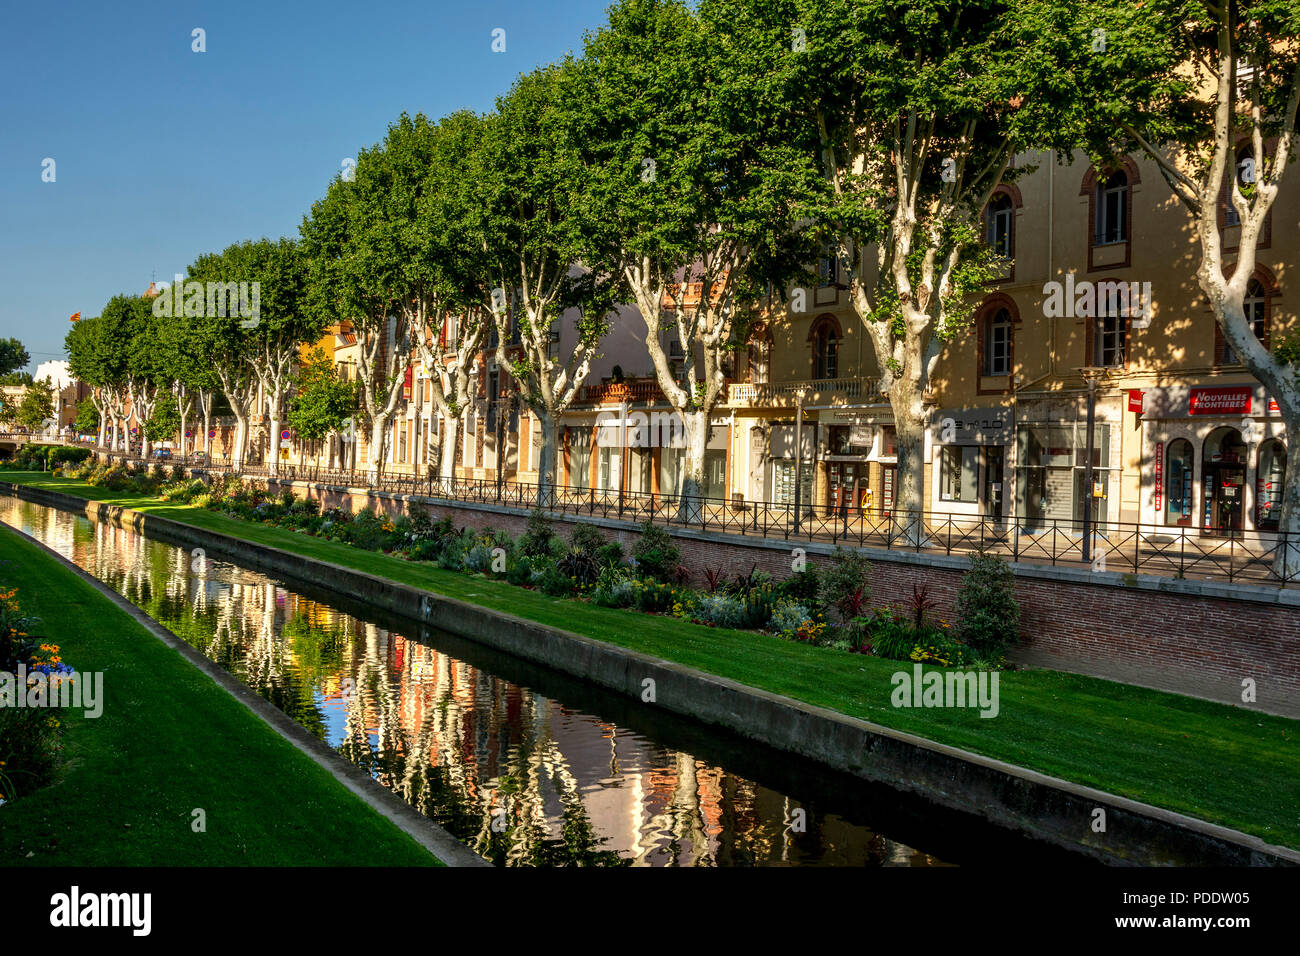 View of the canal of Perpignan, Pyrénées-Orientales, Occitanie, France Stock Photo